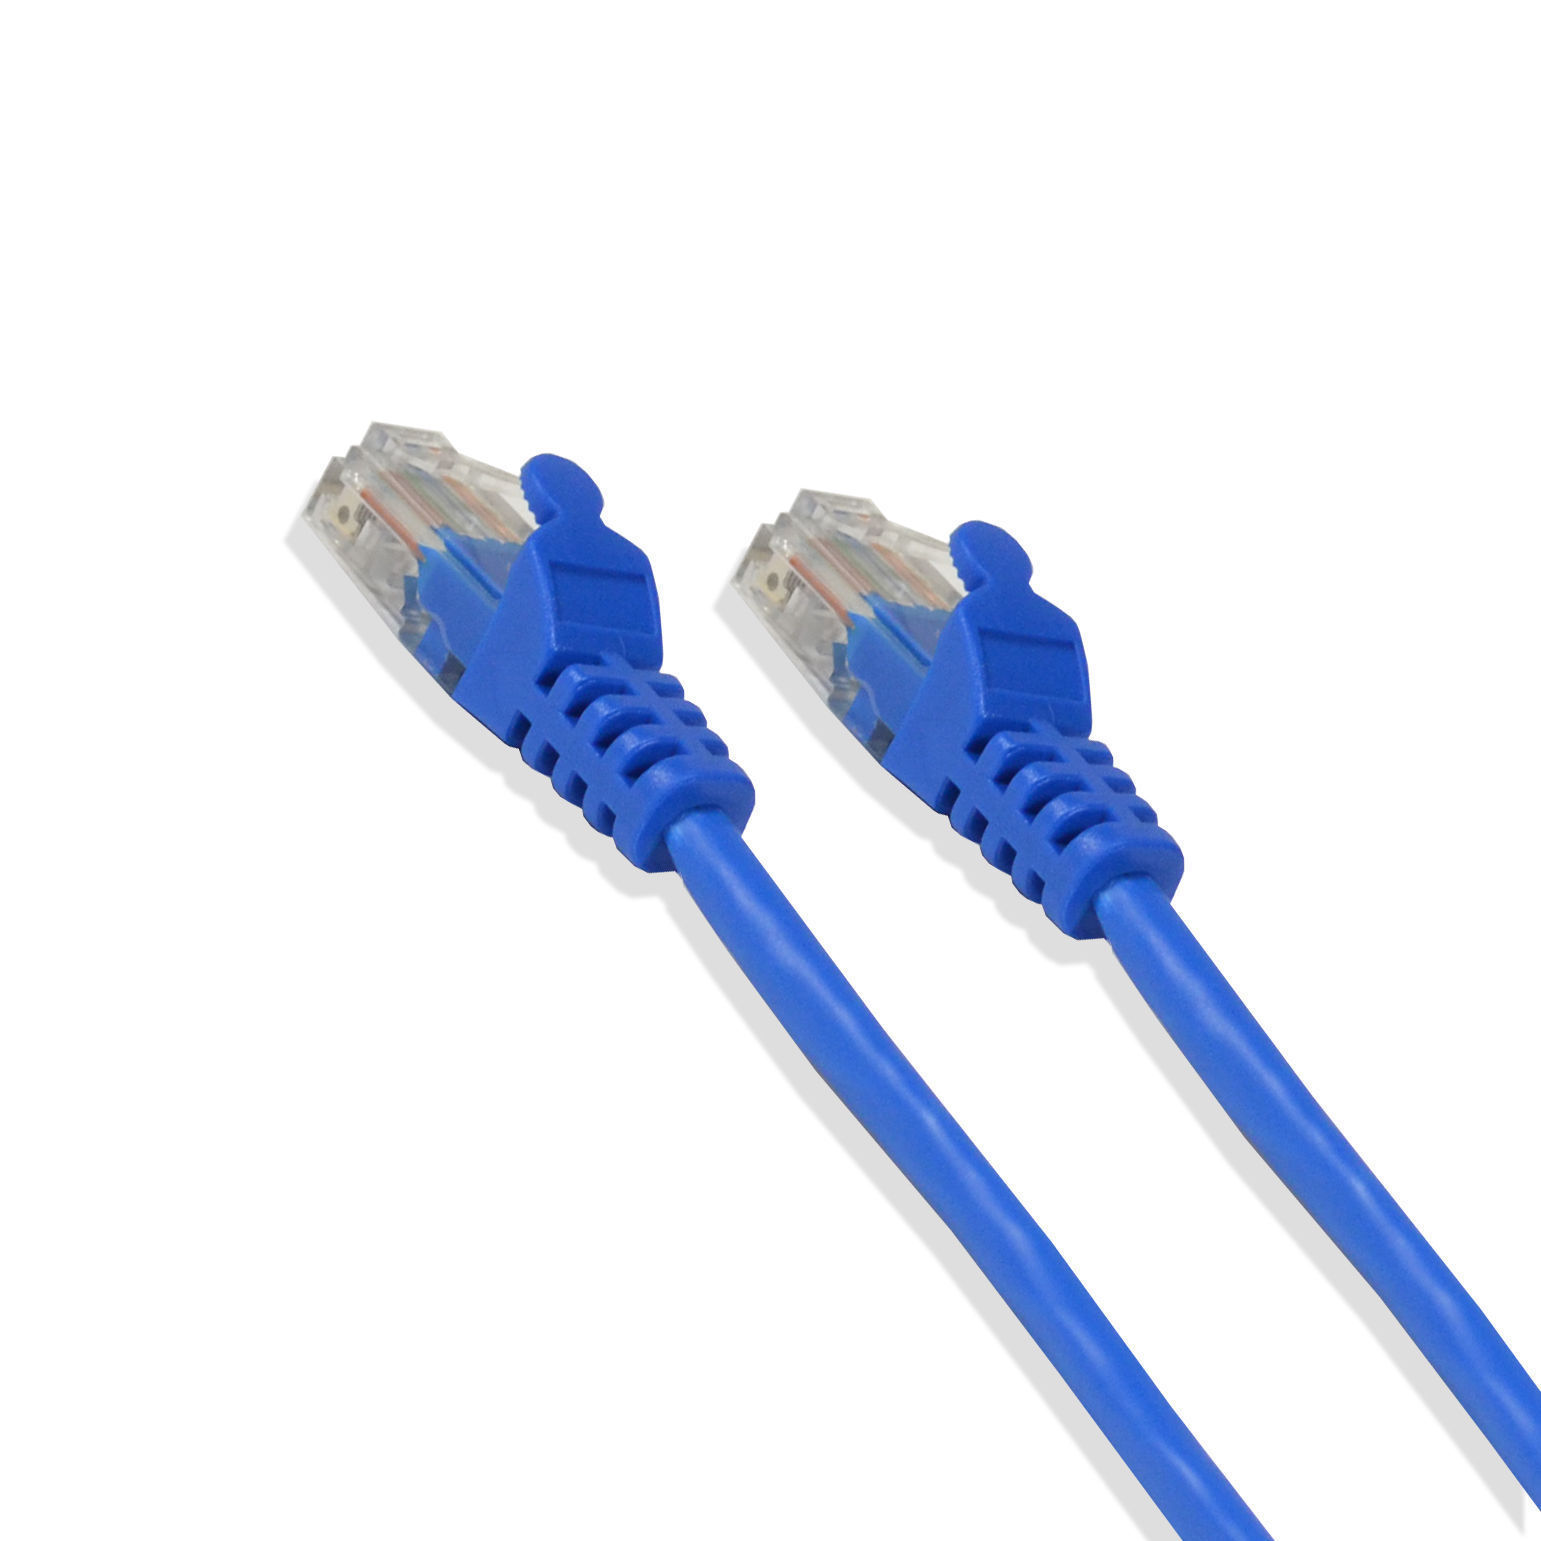 Cat 7 Ethernet Cable for Gaming - 35ft LAN Network Patch Cord Wire, 10GBPS  High Speed Internet Cable, RJ45, 24AWG, 600MHz Connectors for Router